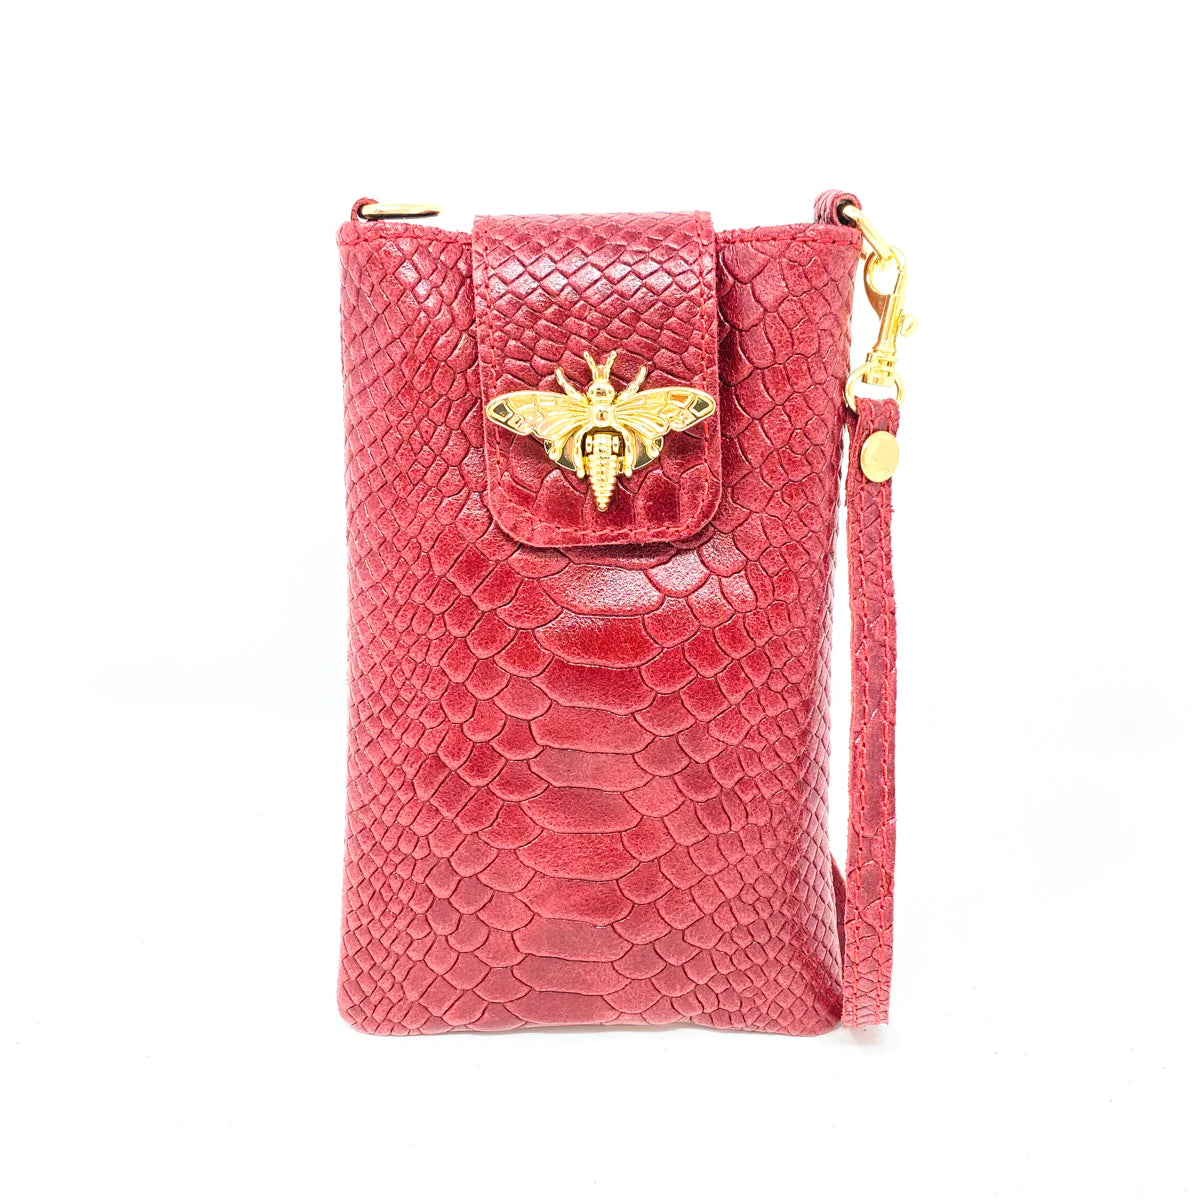 Cellphone Croc Leather Purse- Red